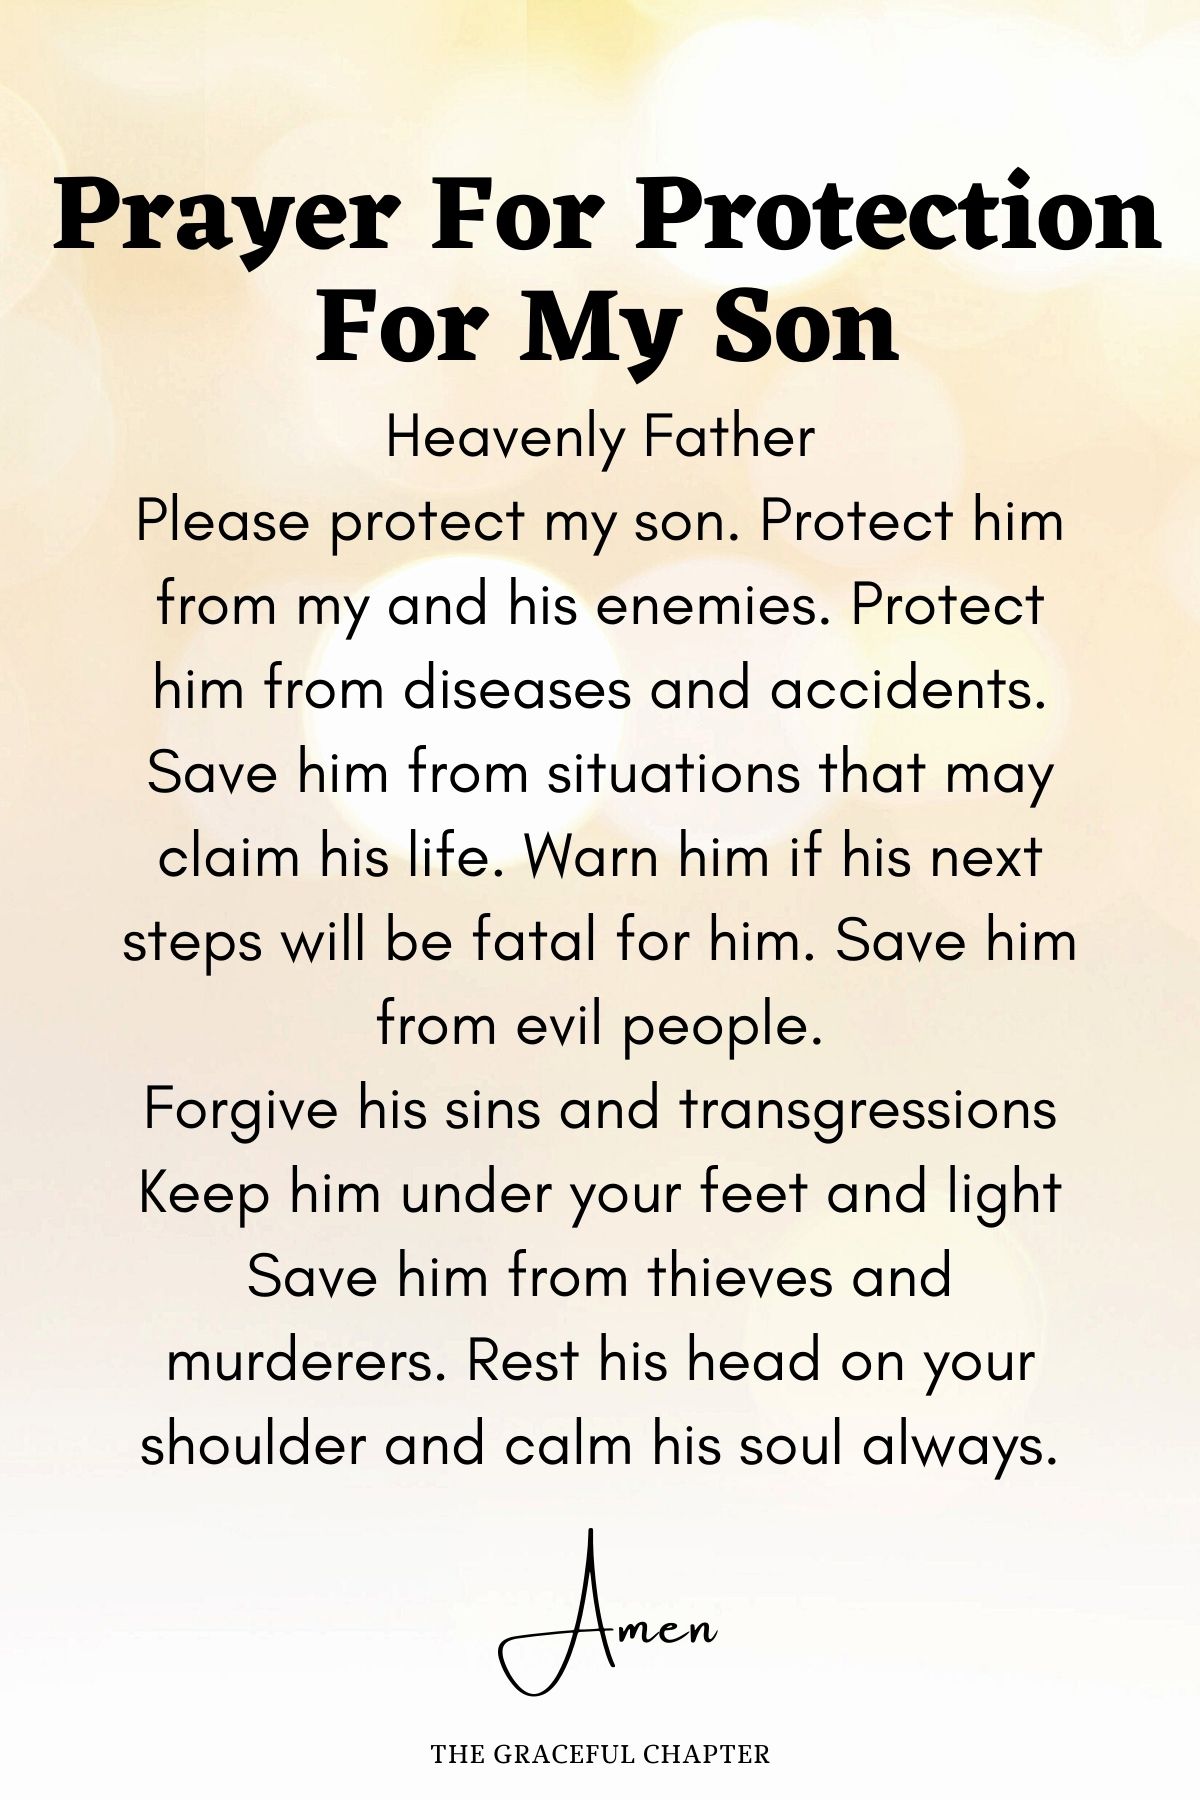 Prayer for protection for my son